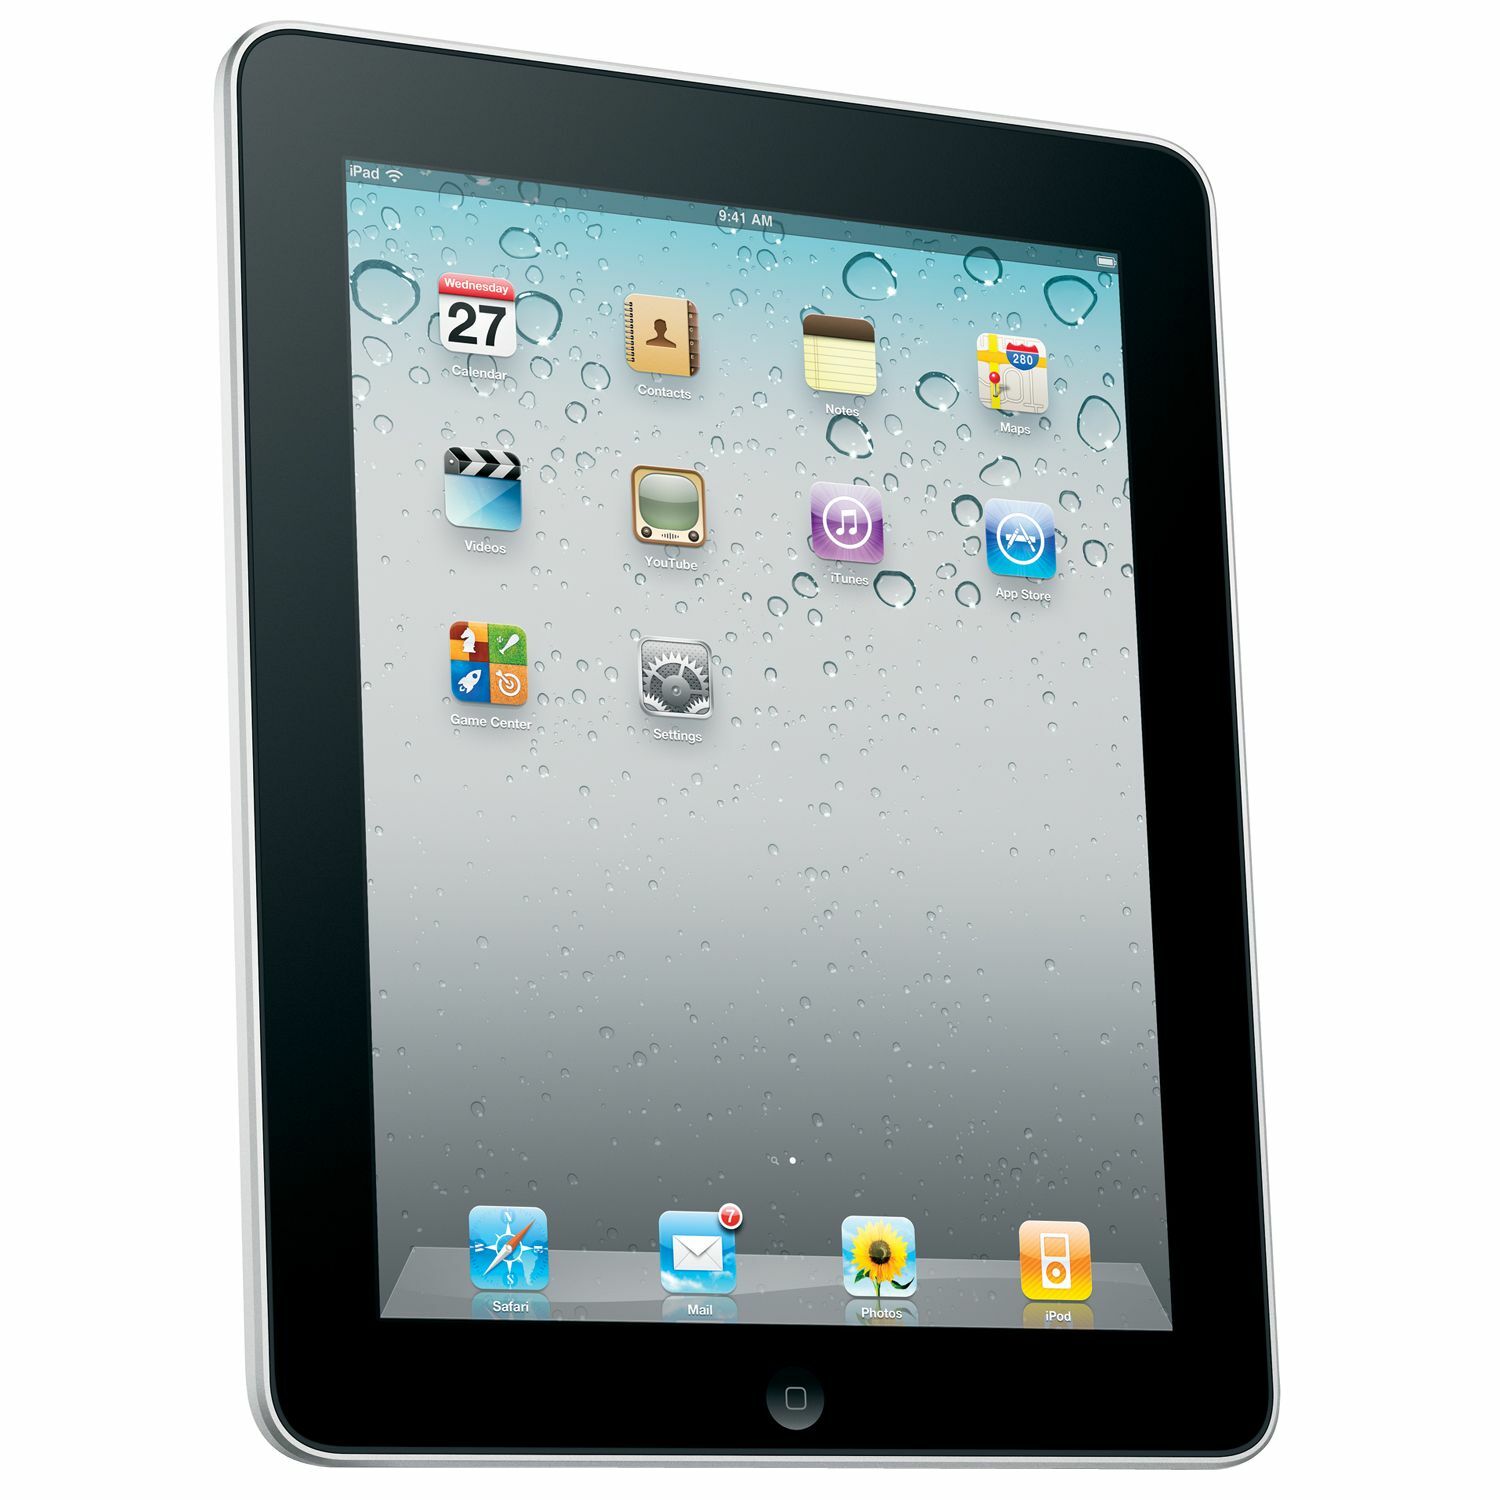 Apple iPad 2 Wi-Fi + 3G - 2nd generation - tablet - 64 GB - 9.7" IPS (1024 x 768) - 3G - AT&T - Black - image 2 of 9